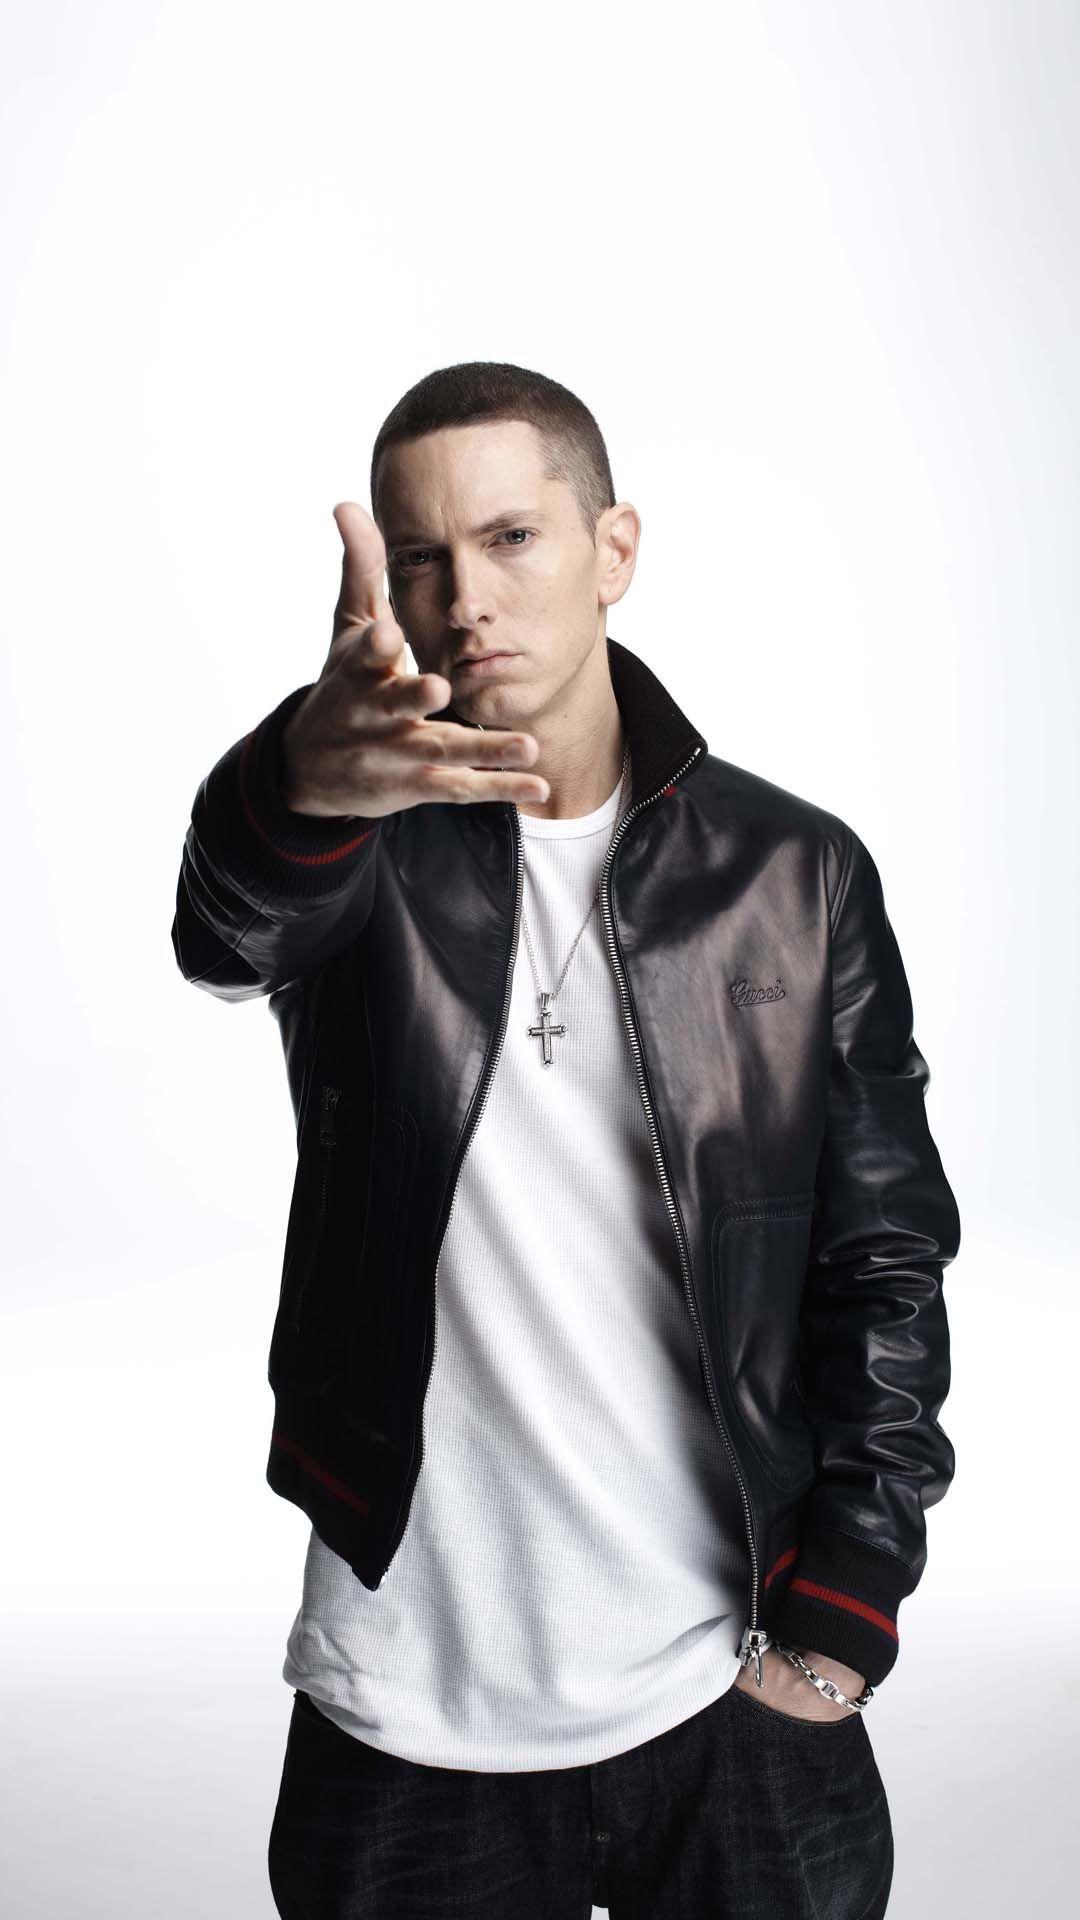 Eminem HTC one wallpaper htc one wallpaper easy to download